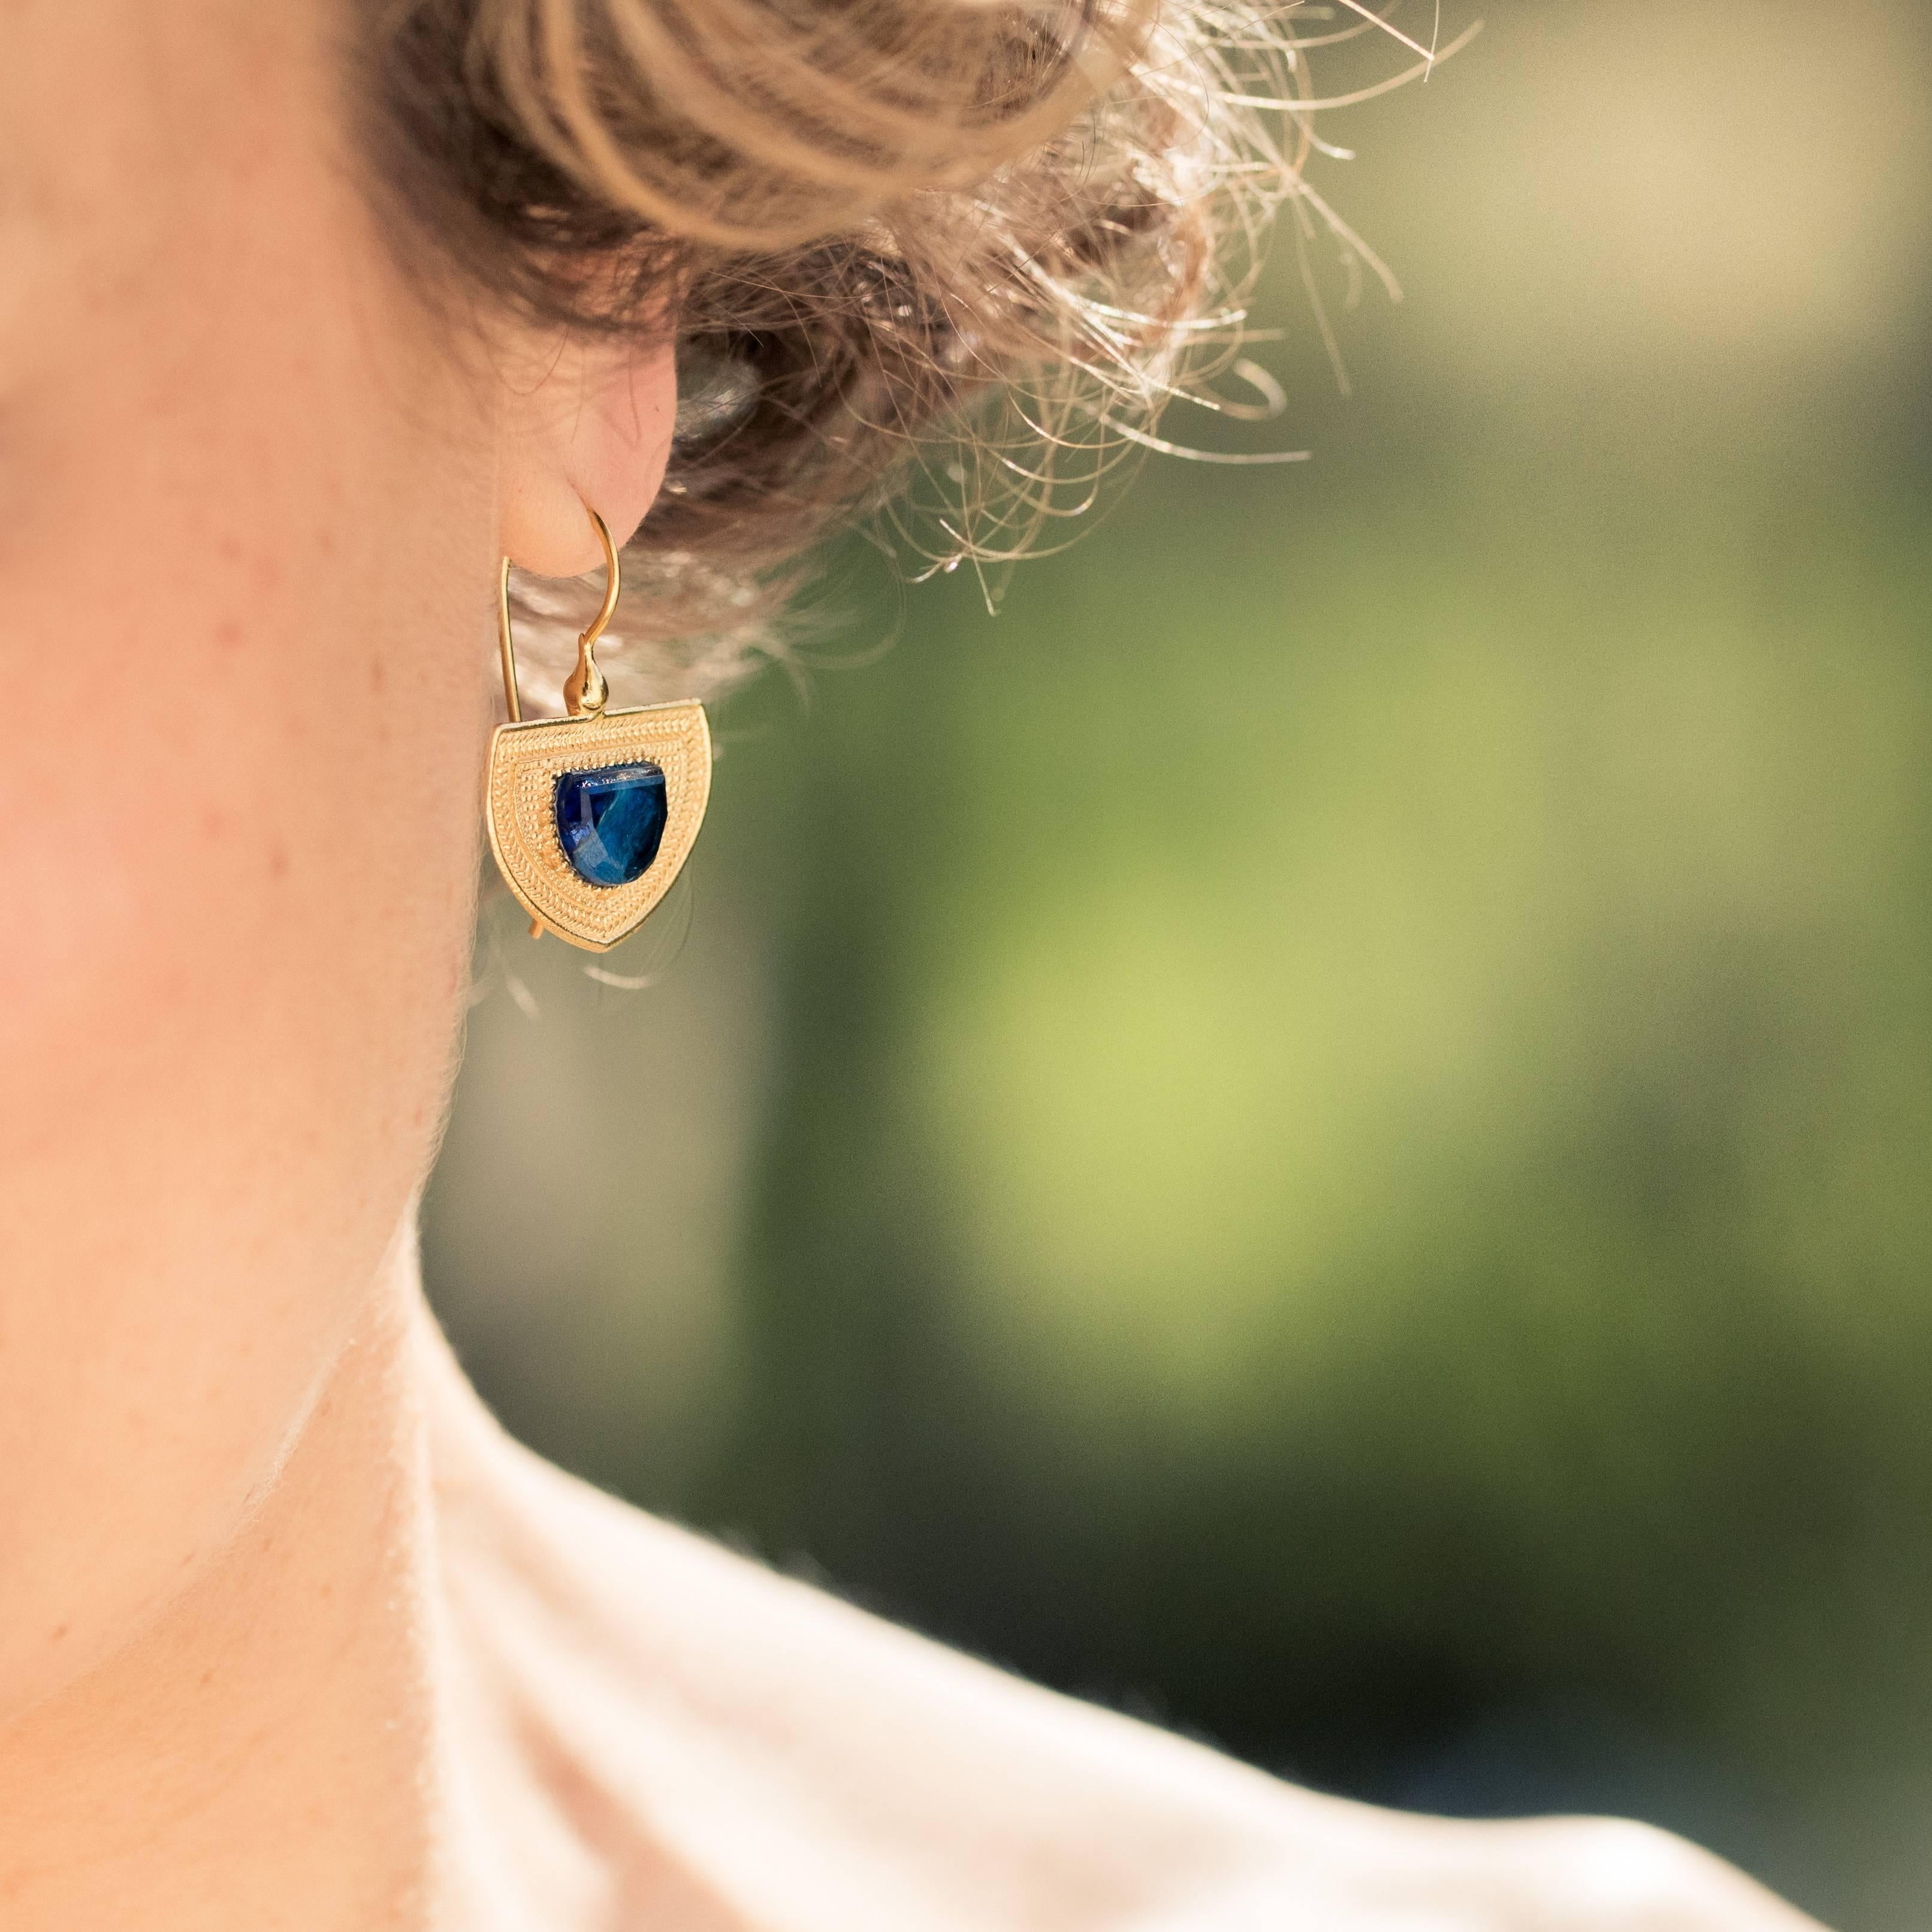 For pierced ears.
Pair of earrings in silver and yellow gold.
Sleepers shaped, they are formed of a chiseled motif set in the center of a blue cut stone. The clasp system is a gooseneck with safety hook.
Length: 3.2 cm, width: 2.2 cm.
New jewel